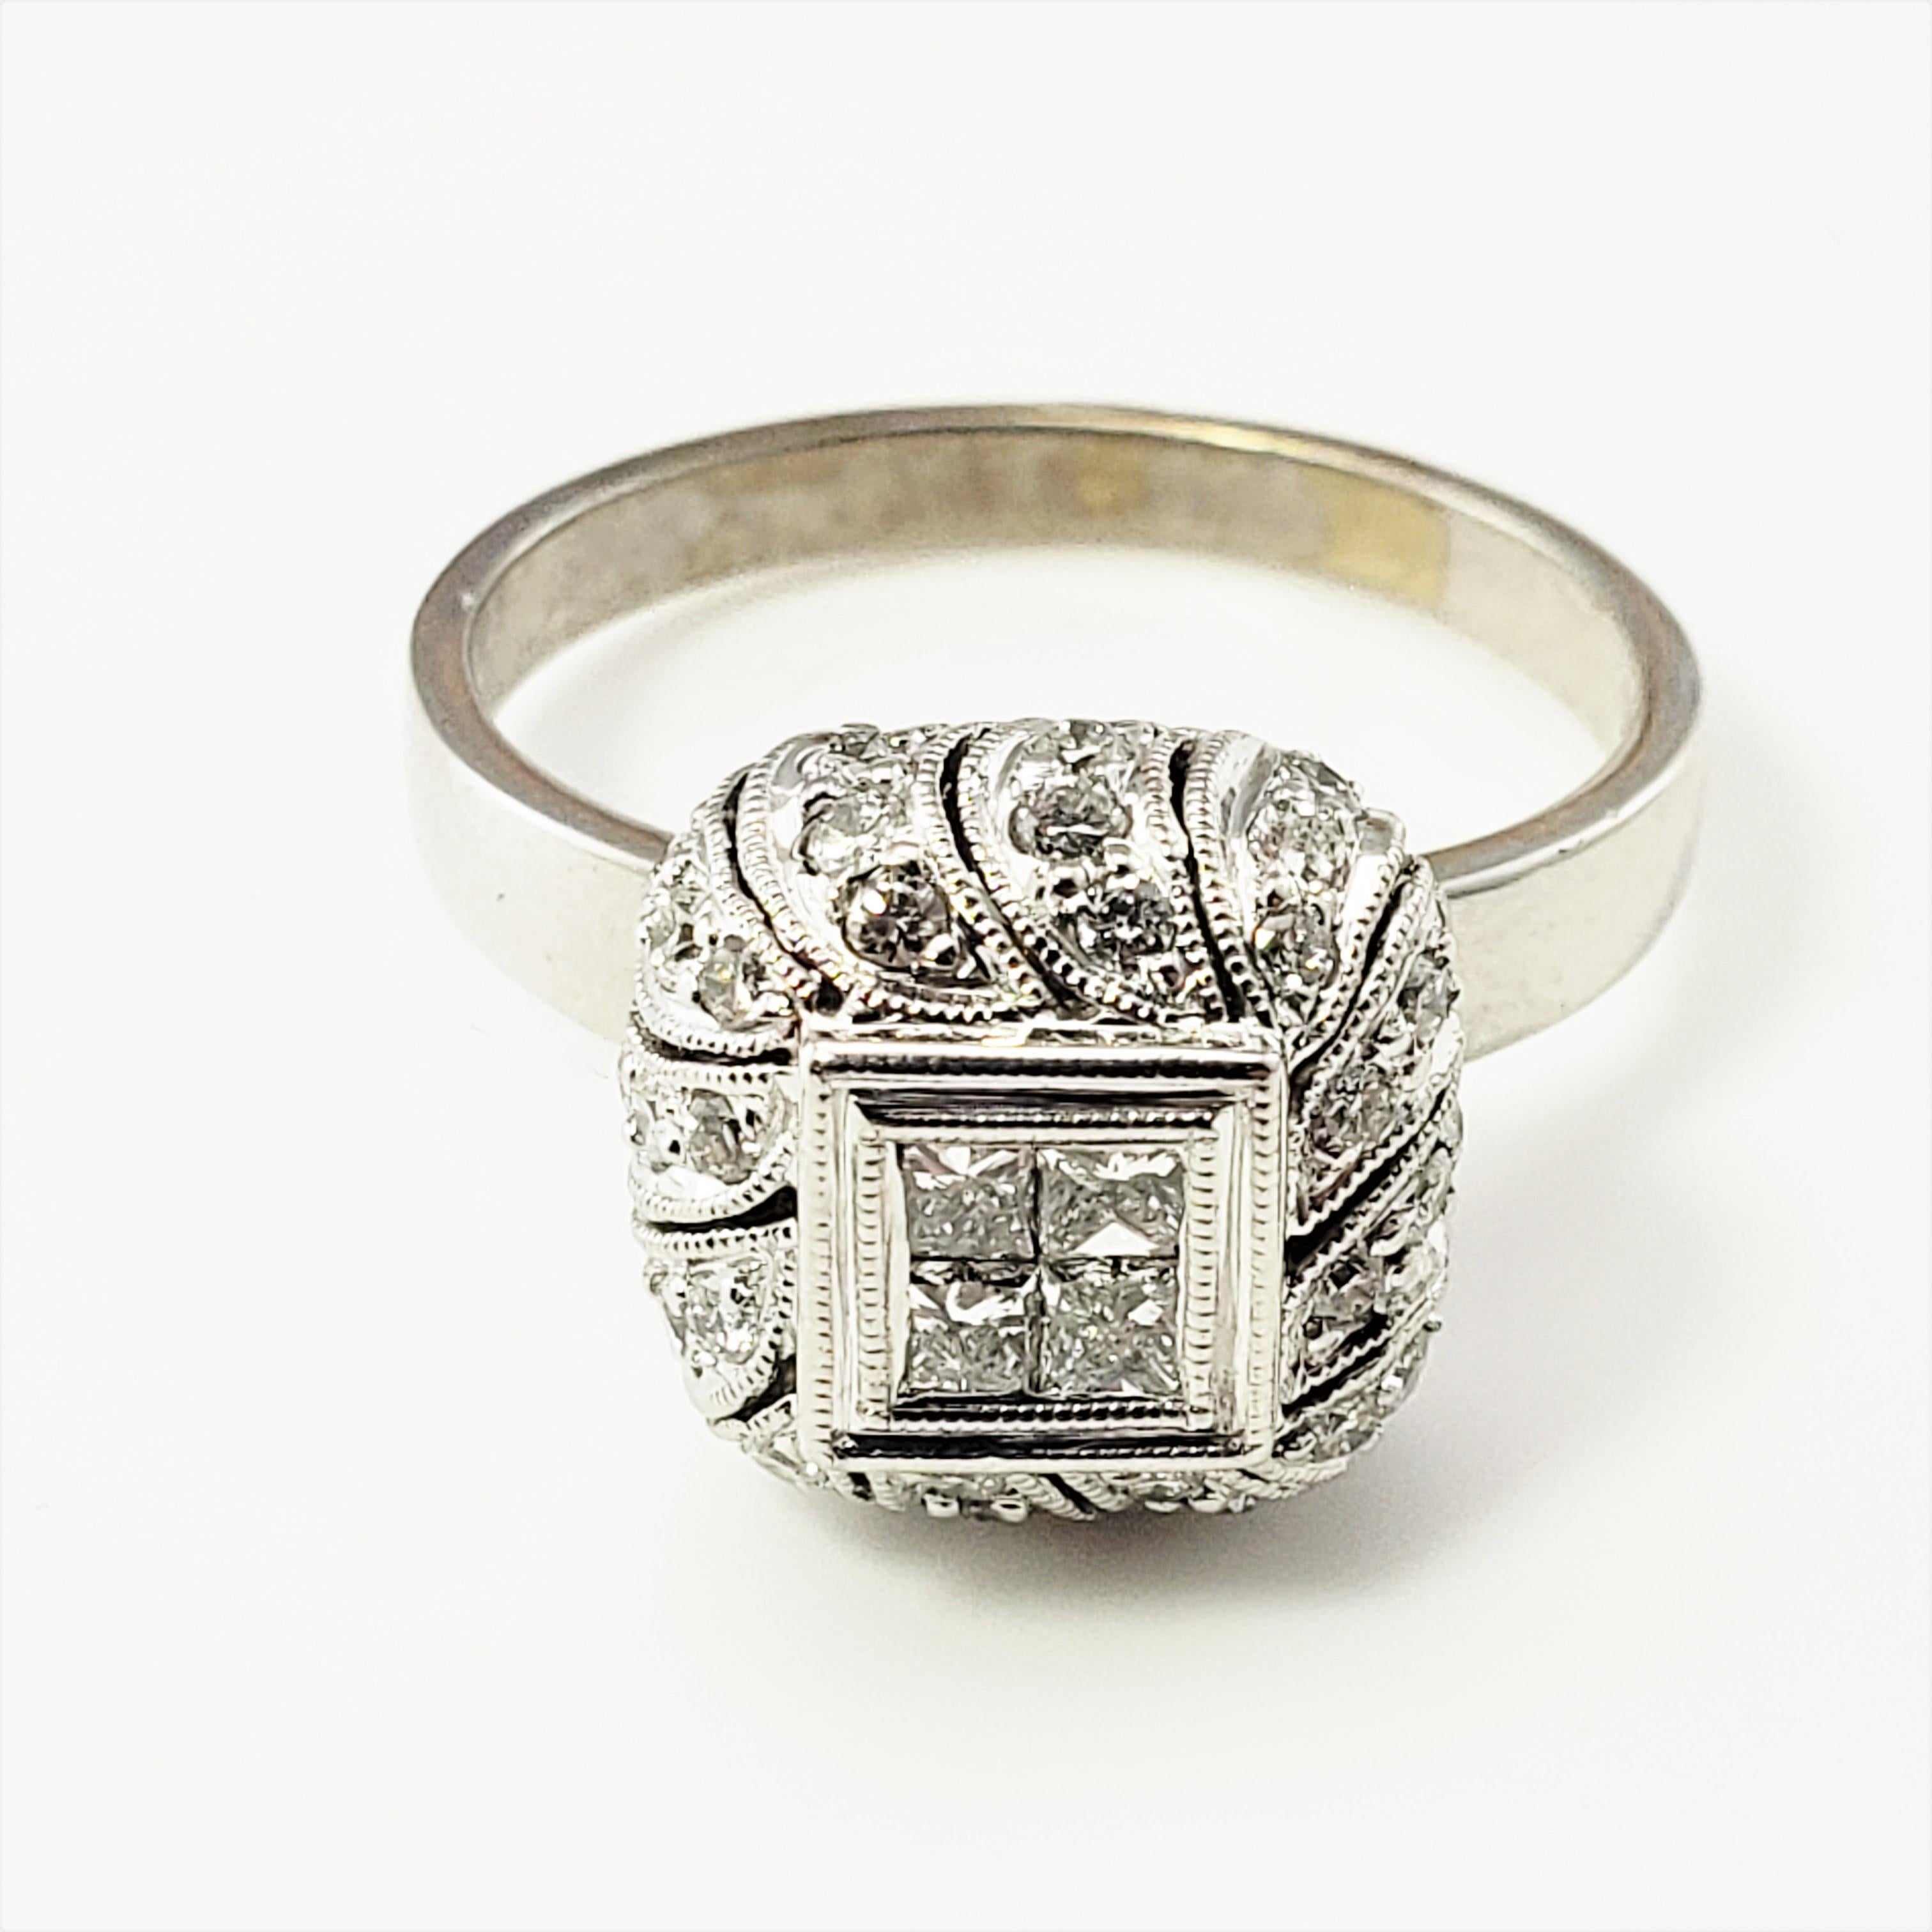 18 Karat White Gold and Diamond Ring Size 7 -

This stunning ring features four princess cut diamonds in its center (.05 ct. each) surrounded by 48 round brilliant cut diamonds and set in beautifully designed 18K white gold.  Width:  11 mm.  Shank: 